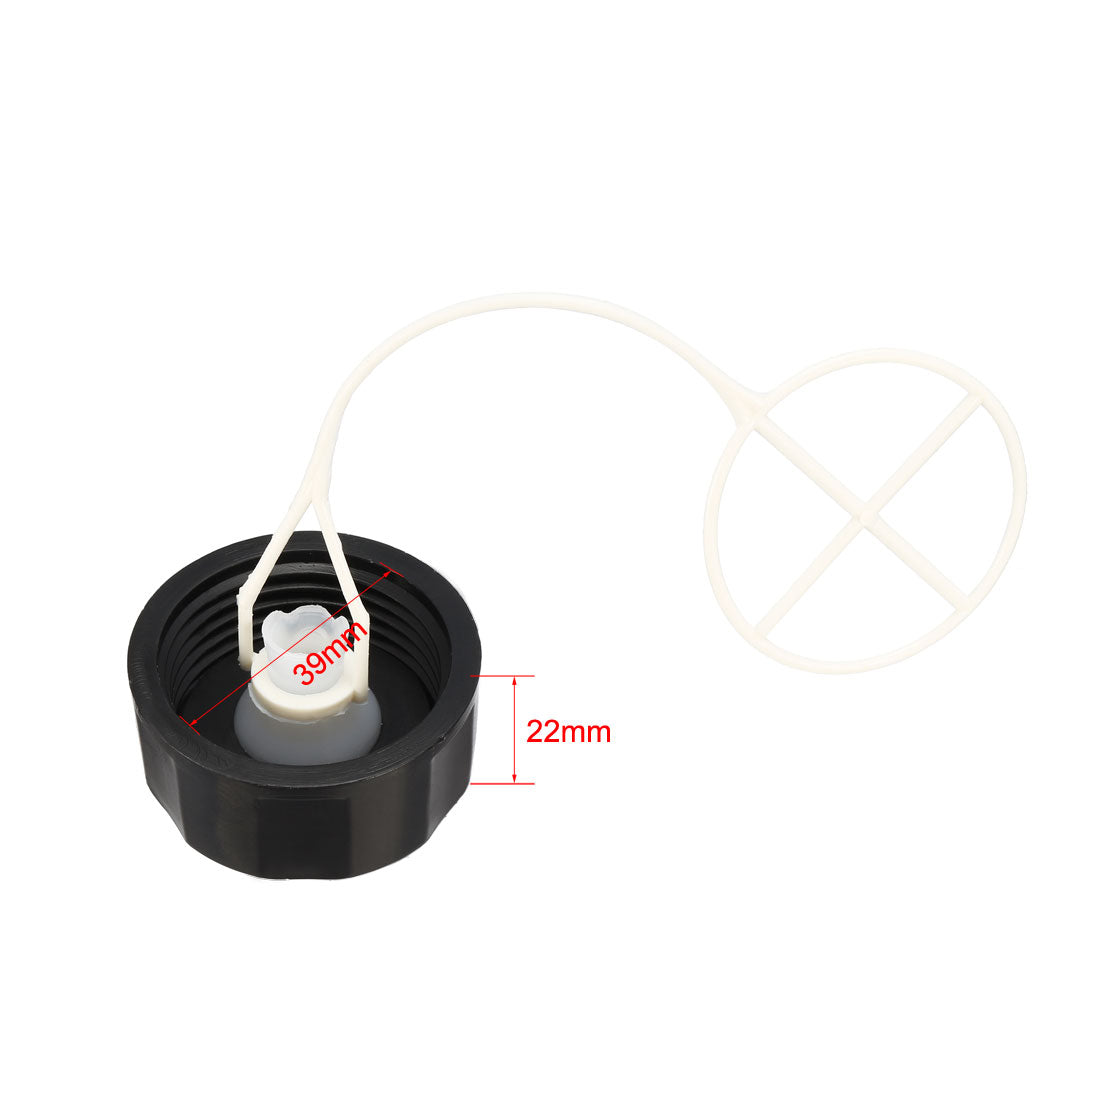 uxcell Uxcell Replace Fuel Tank Cap Fit for GX22 for GX25 for GX35 Lawn Mowers Engine